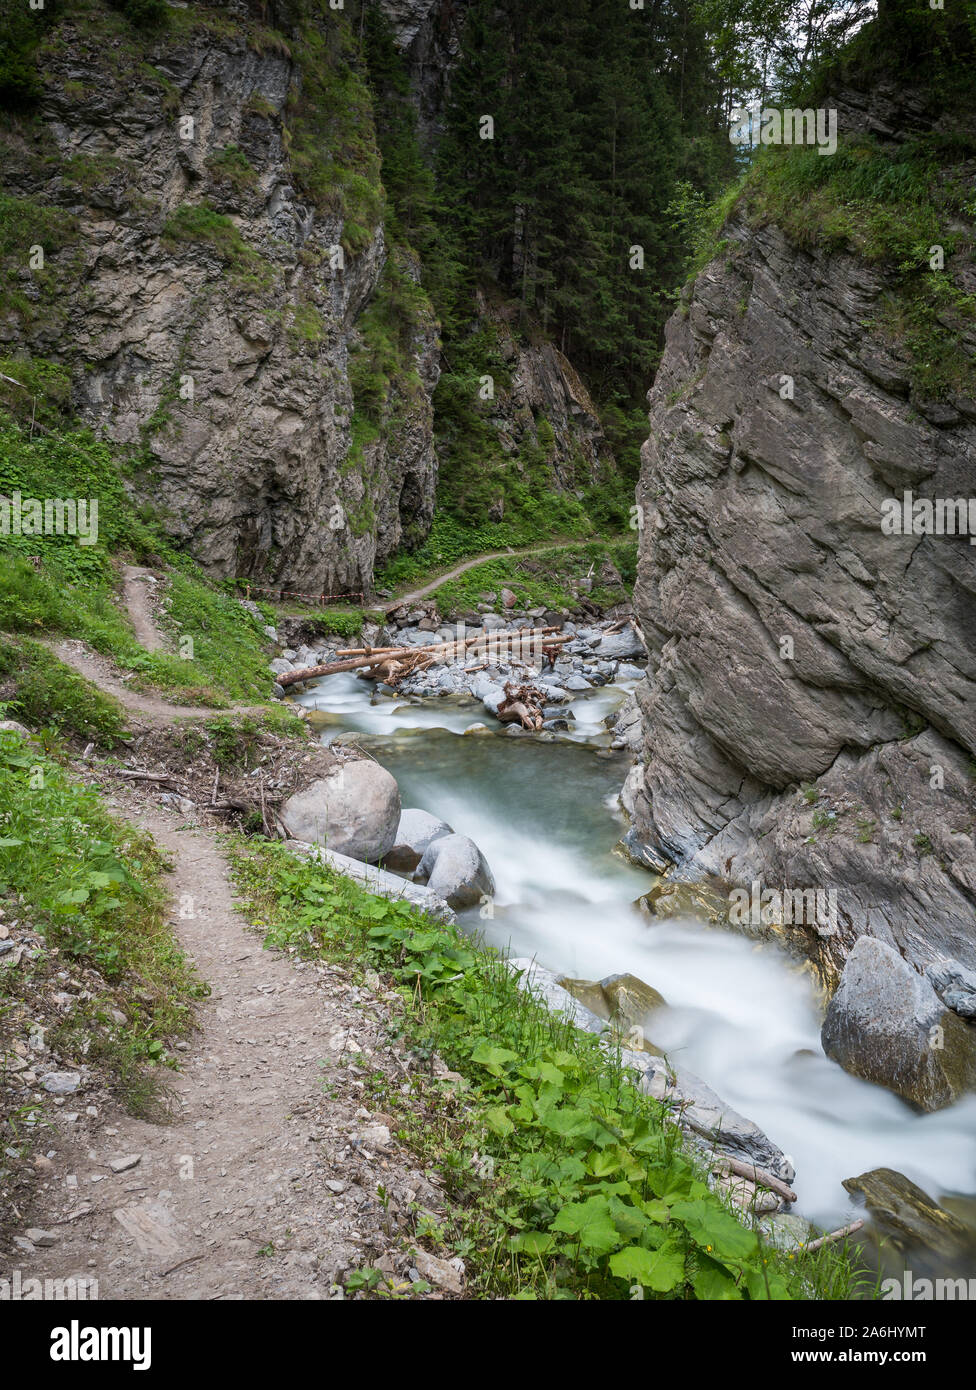 View of the Radurschl Canyon, location of a famous hiking trail in Pfunds, Tyrol, Austria Stock Photo